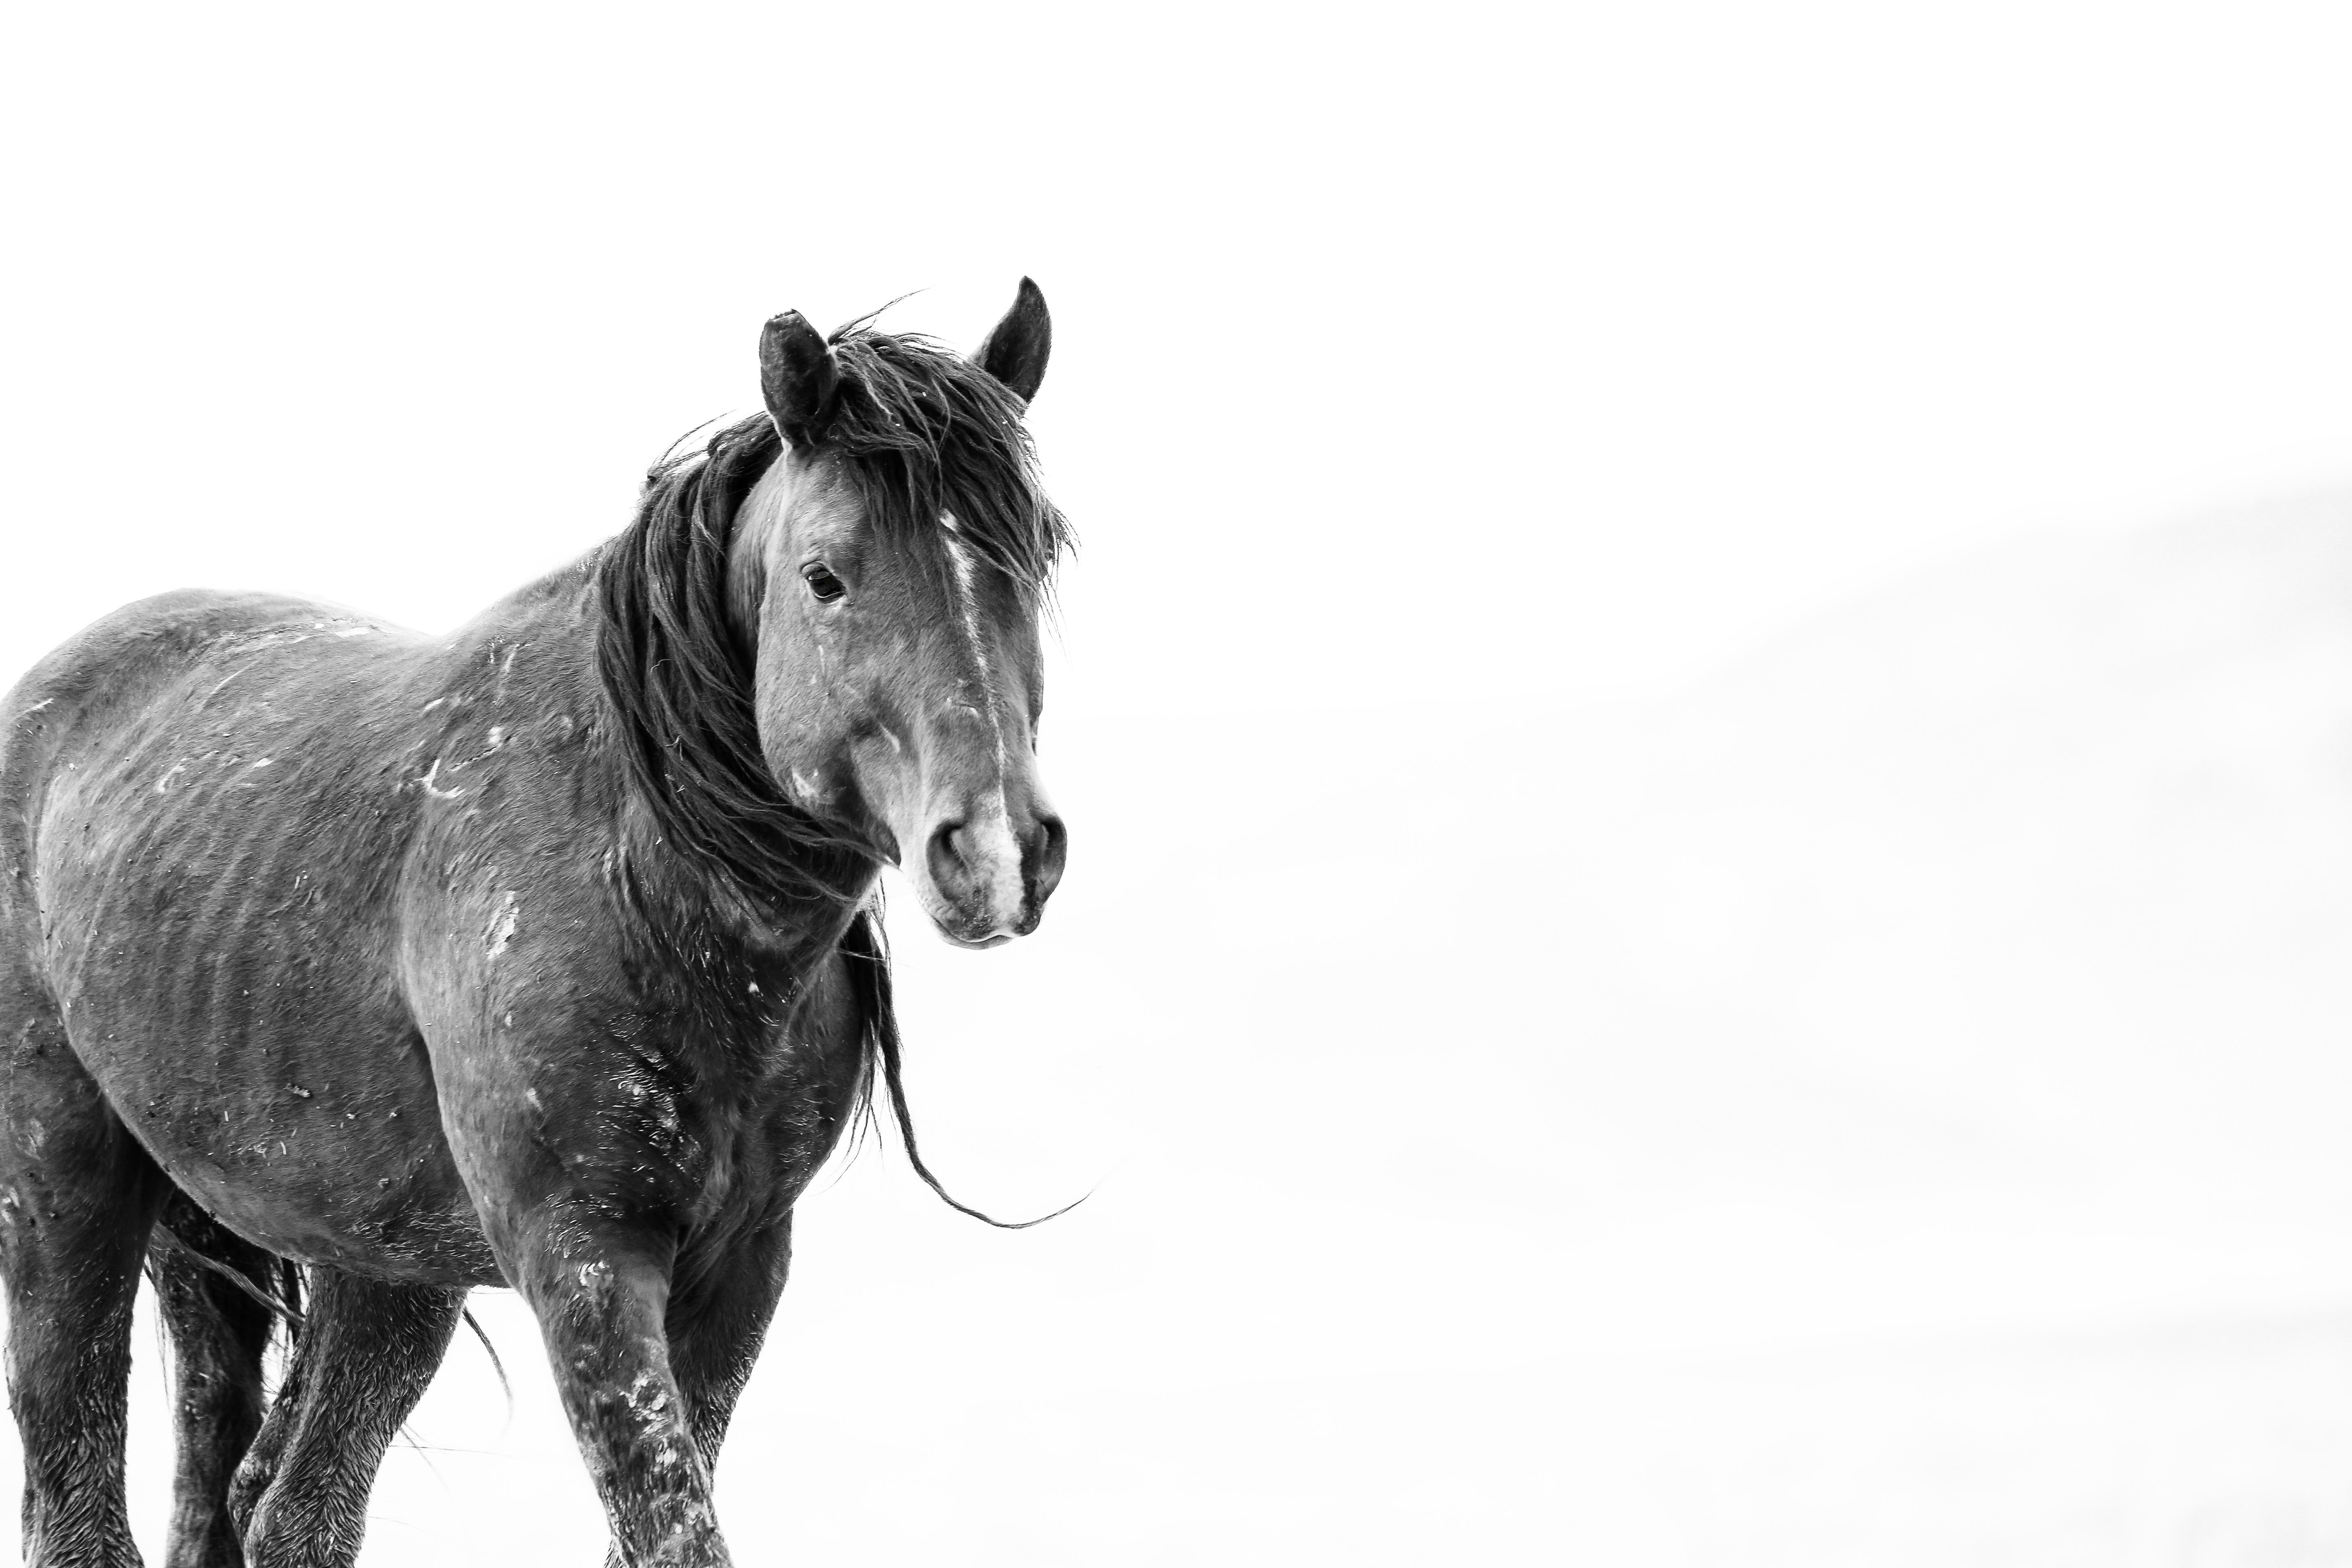 Black and White Photograph Shane Russeck - SOLO 36x48  Photographie noir et blanc, chevaux sauvages Mustang Photographie ART